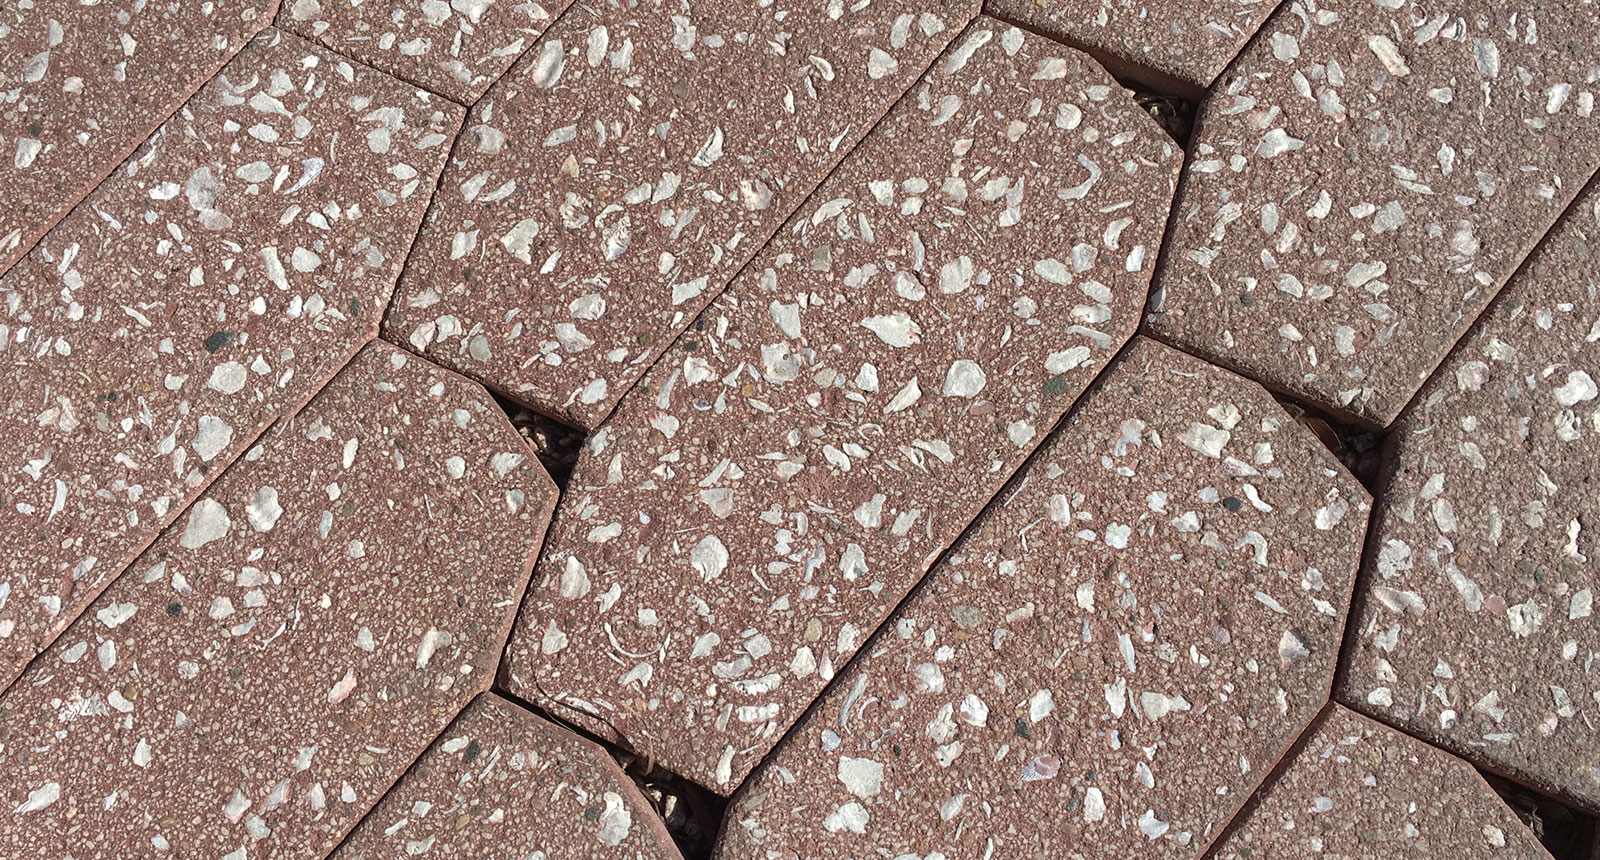 A close-up image of Wausau Tile’s V-Series permeable pavers in a brown color.